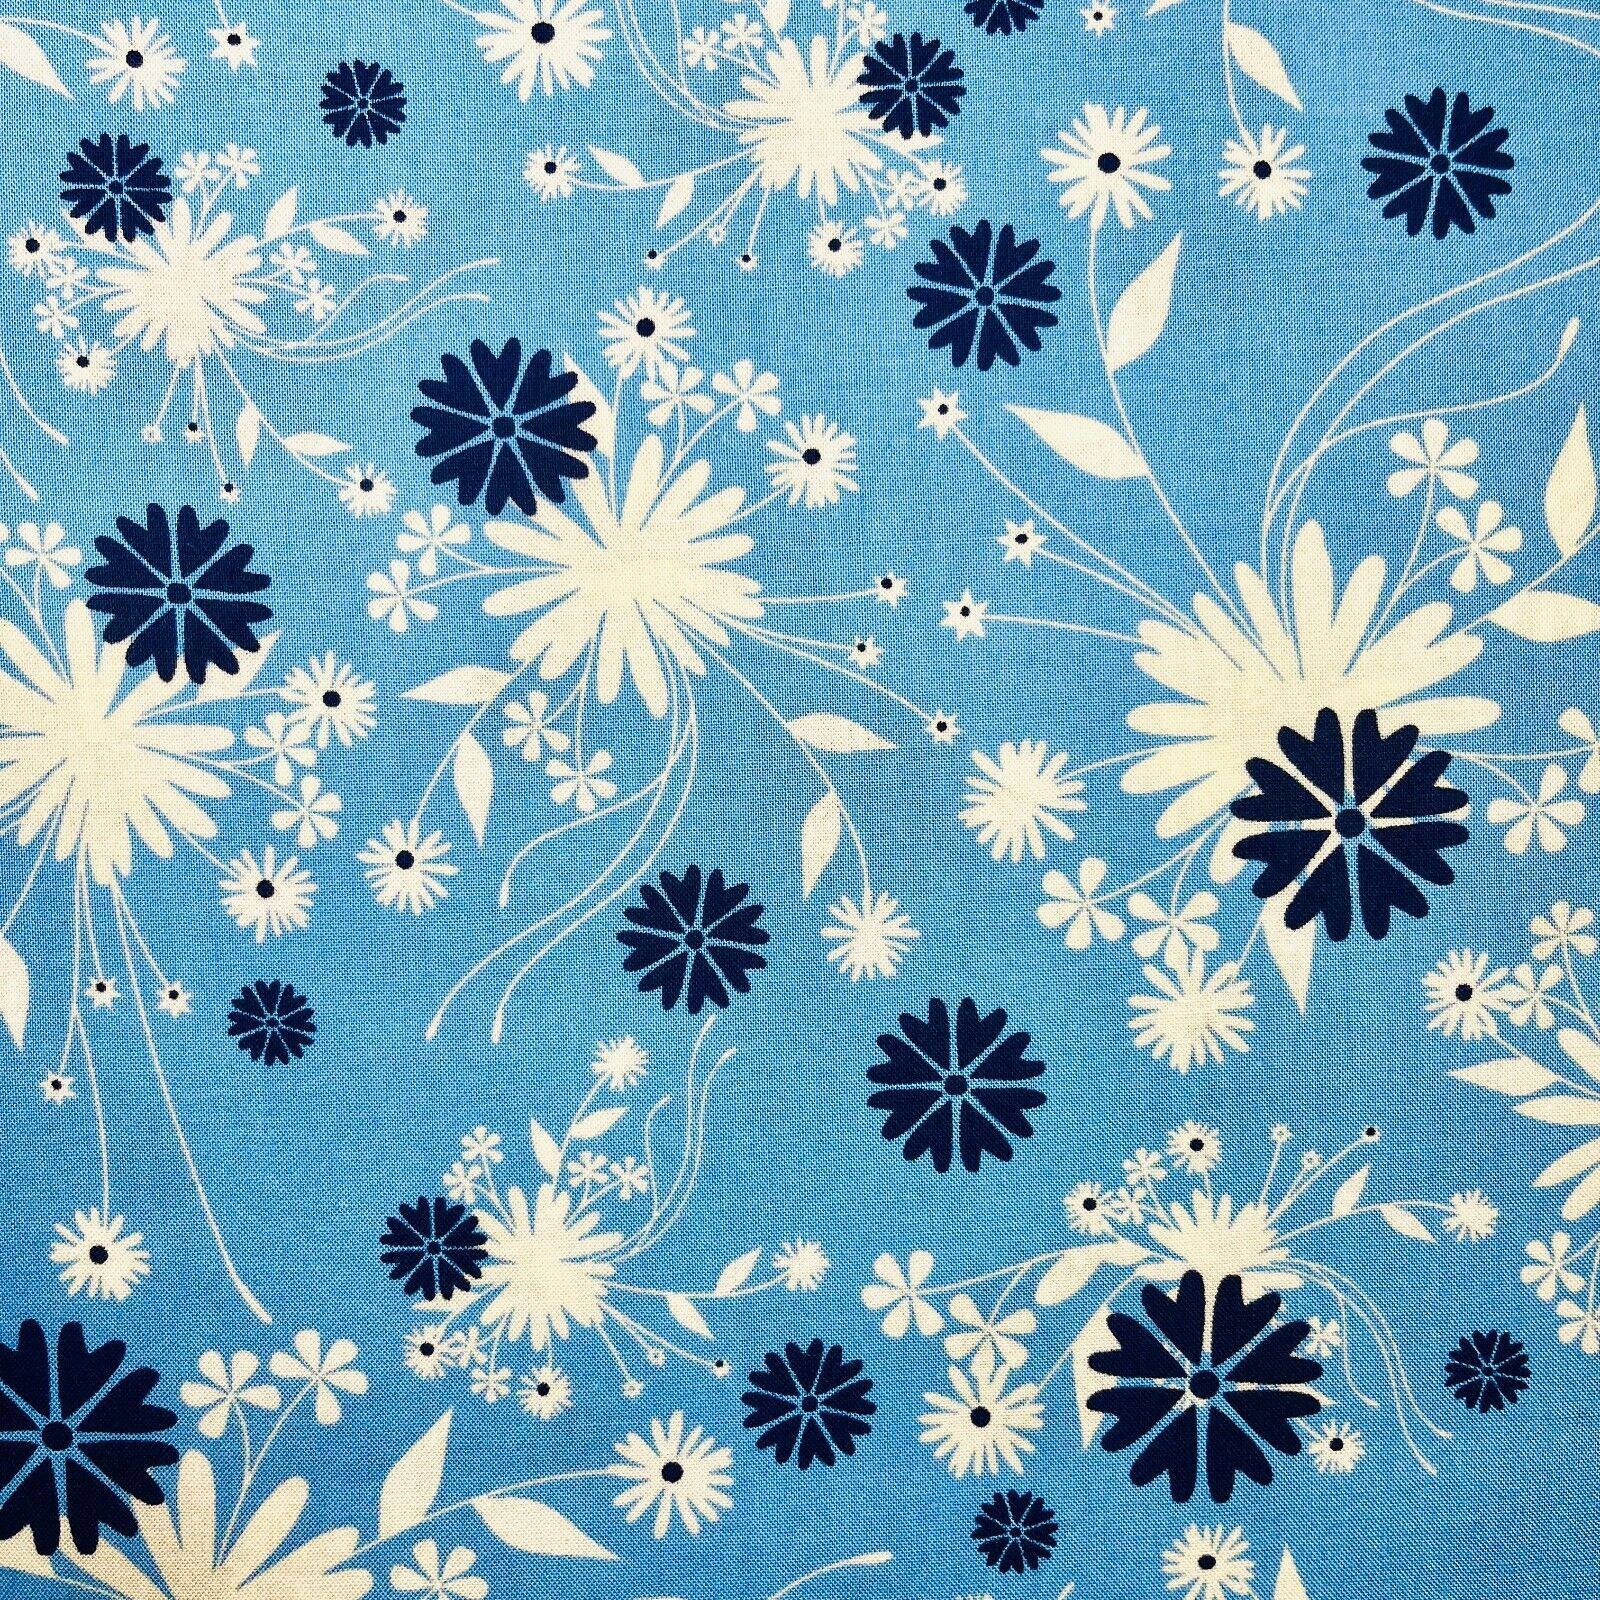 Primary image for Floral Fabric Midnight Kisses Heidi Grace Designs Joann 100% Cotton By the Yard